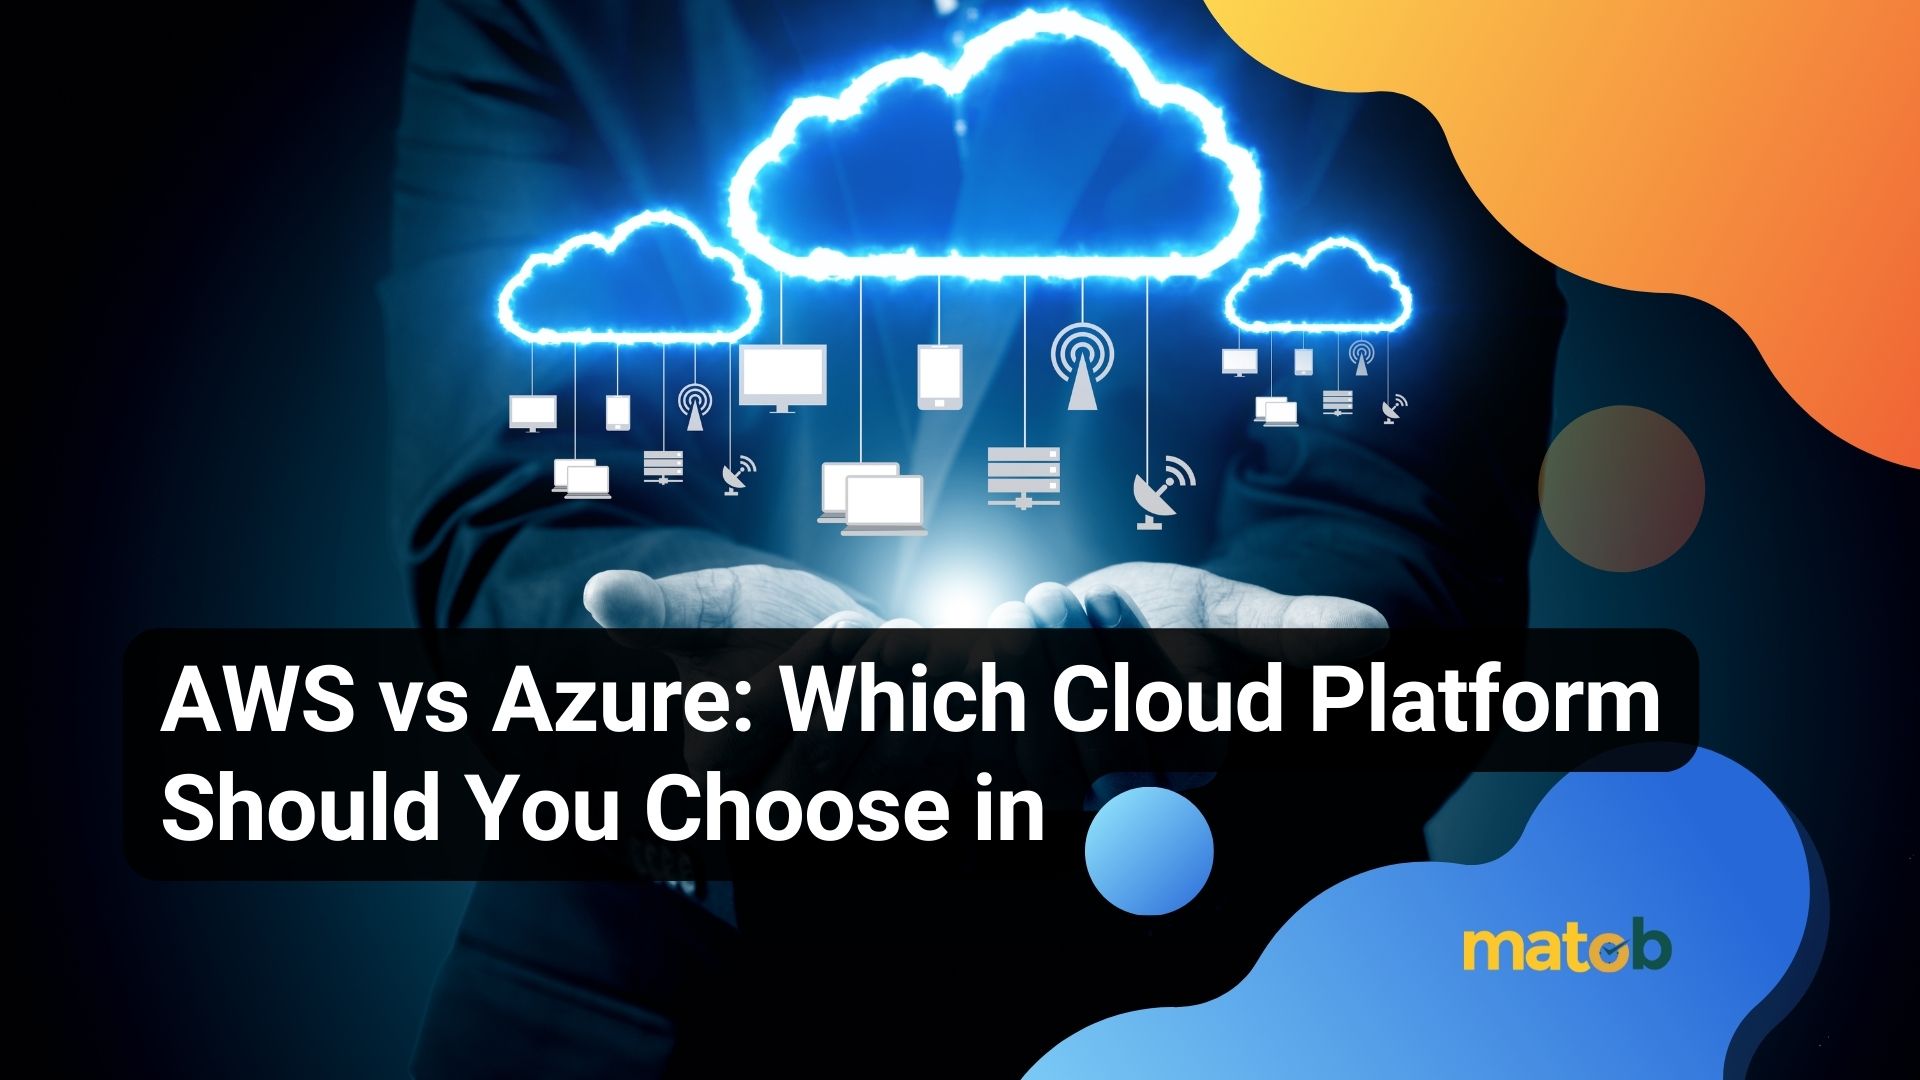 AWS vs Azure: Which Cloud Platform Should You Choose in